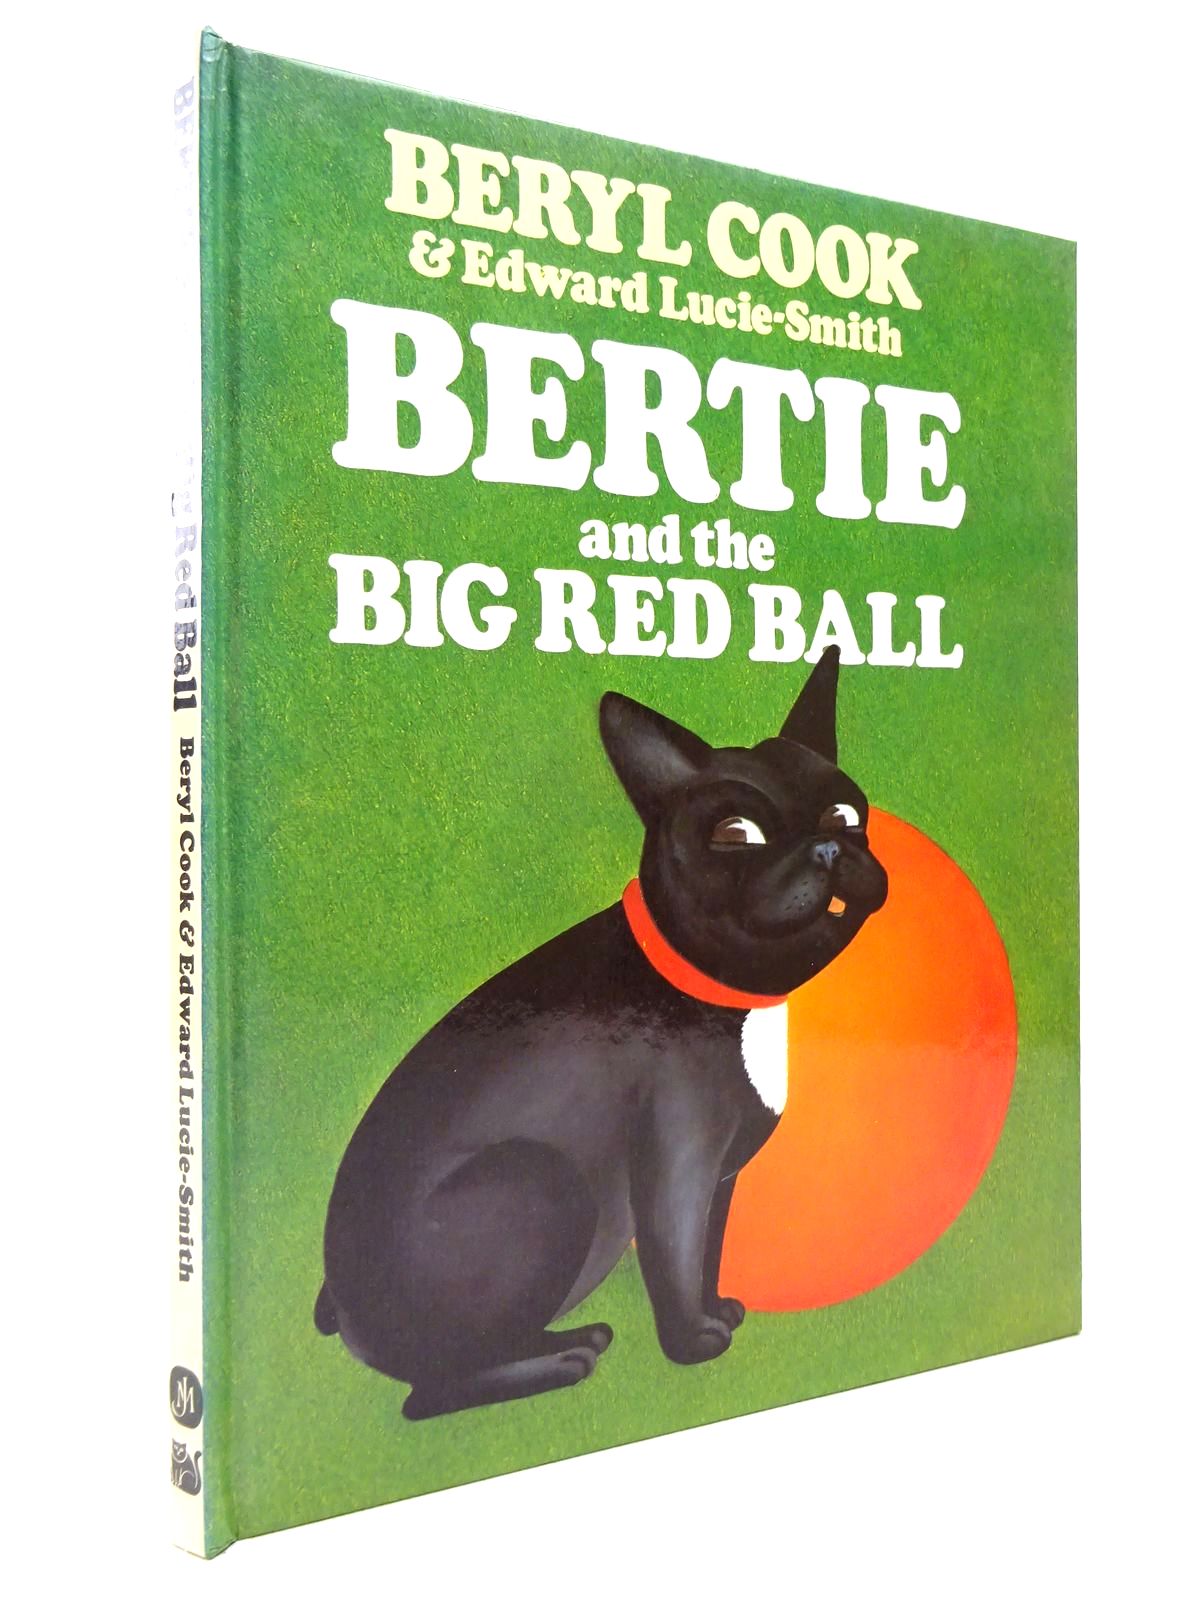 Photo of BERTIE AND THE BIG RED BALL written by Lucie-Smith, Edward illustrated by Cook, Beryl published by John Murray, Gallery Five (STOCK CODE: 1815530)  for sale by Stella & Rose's Books